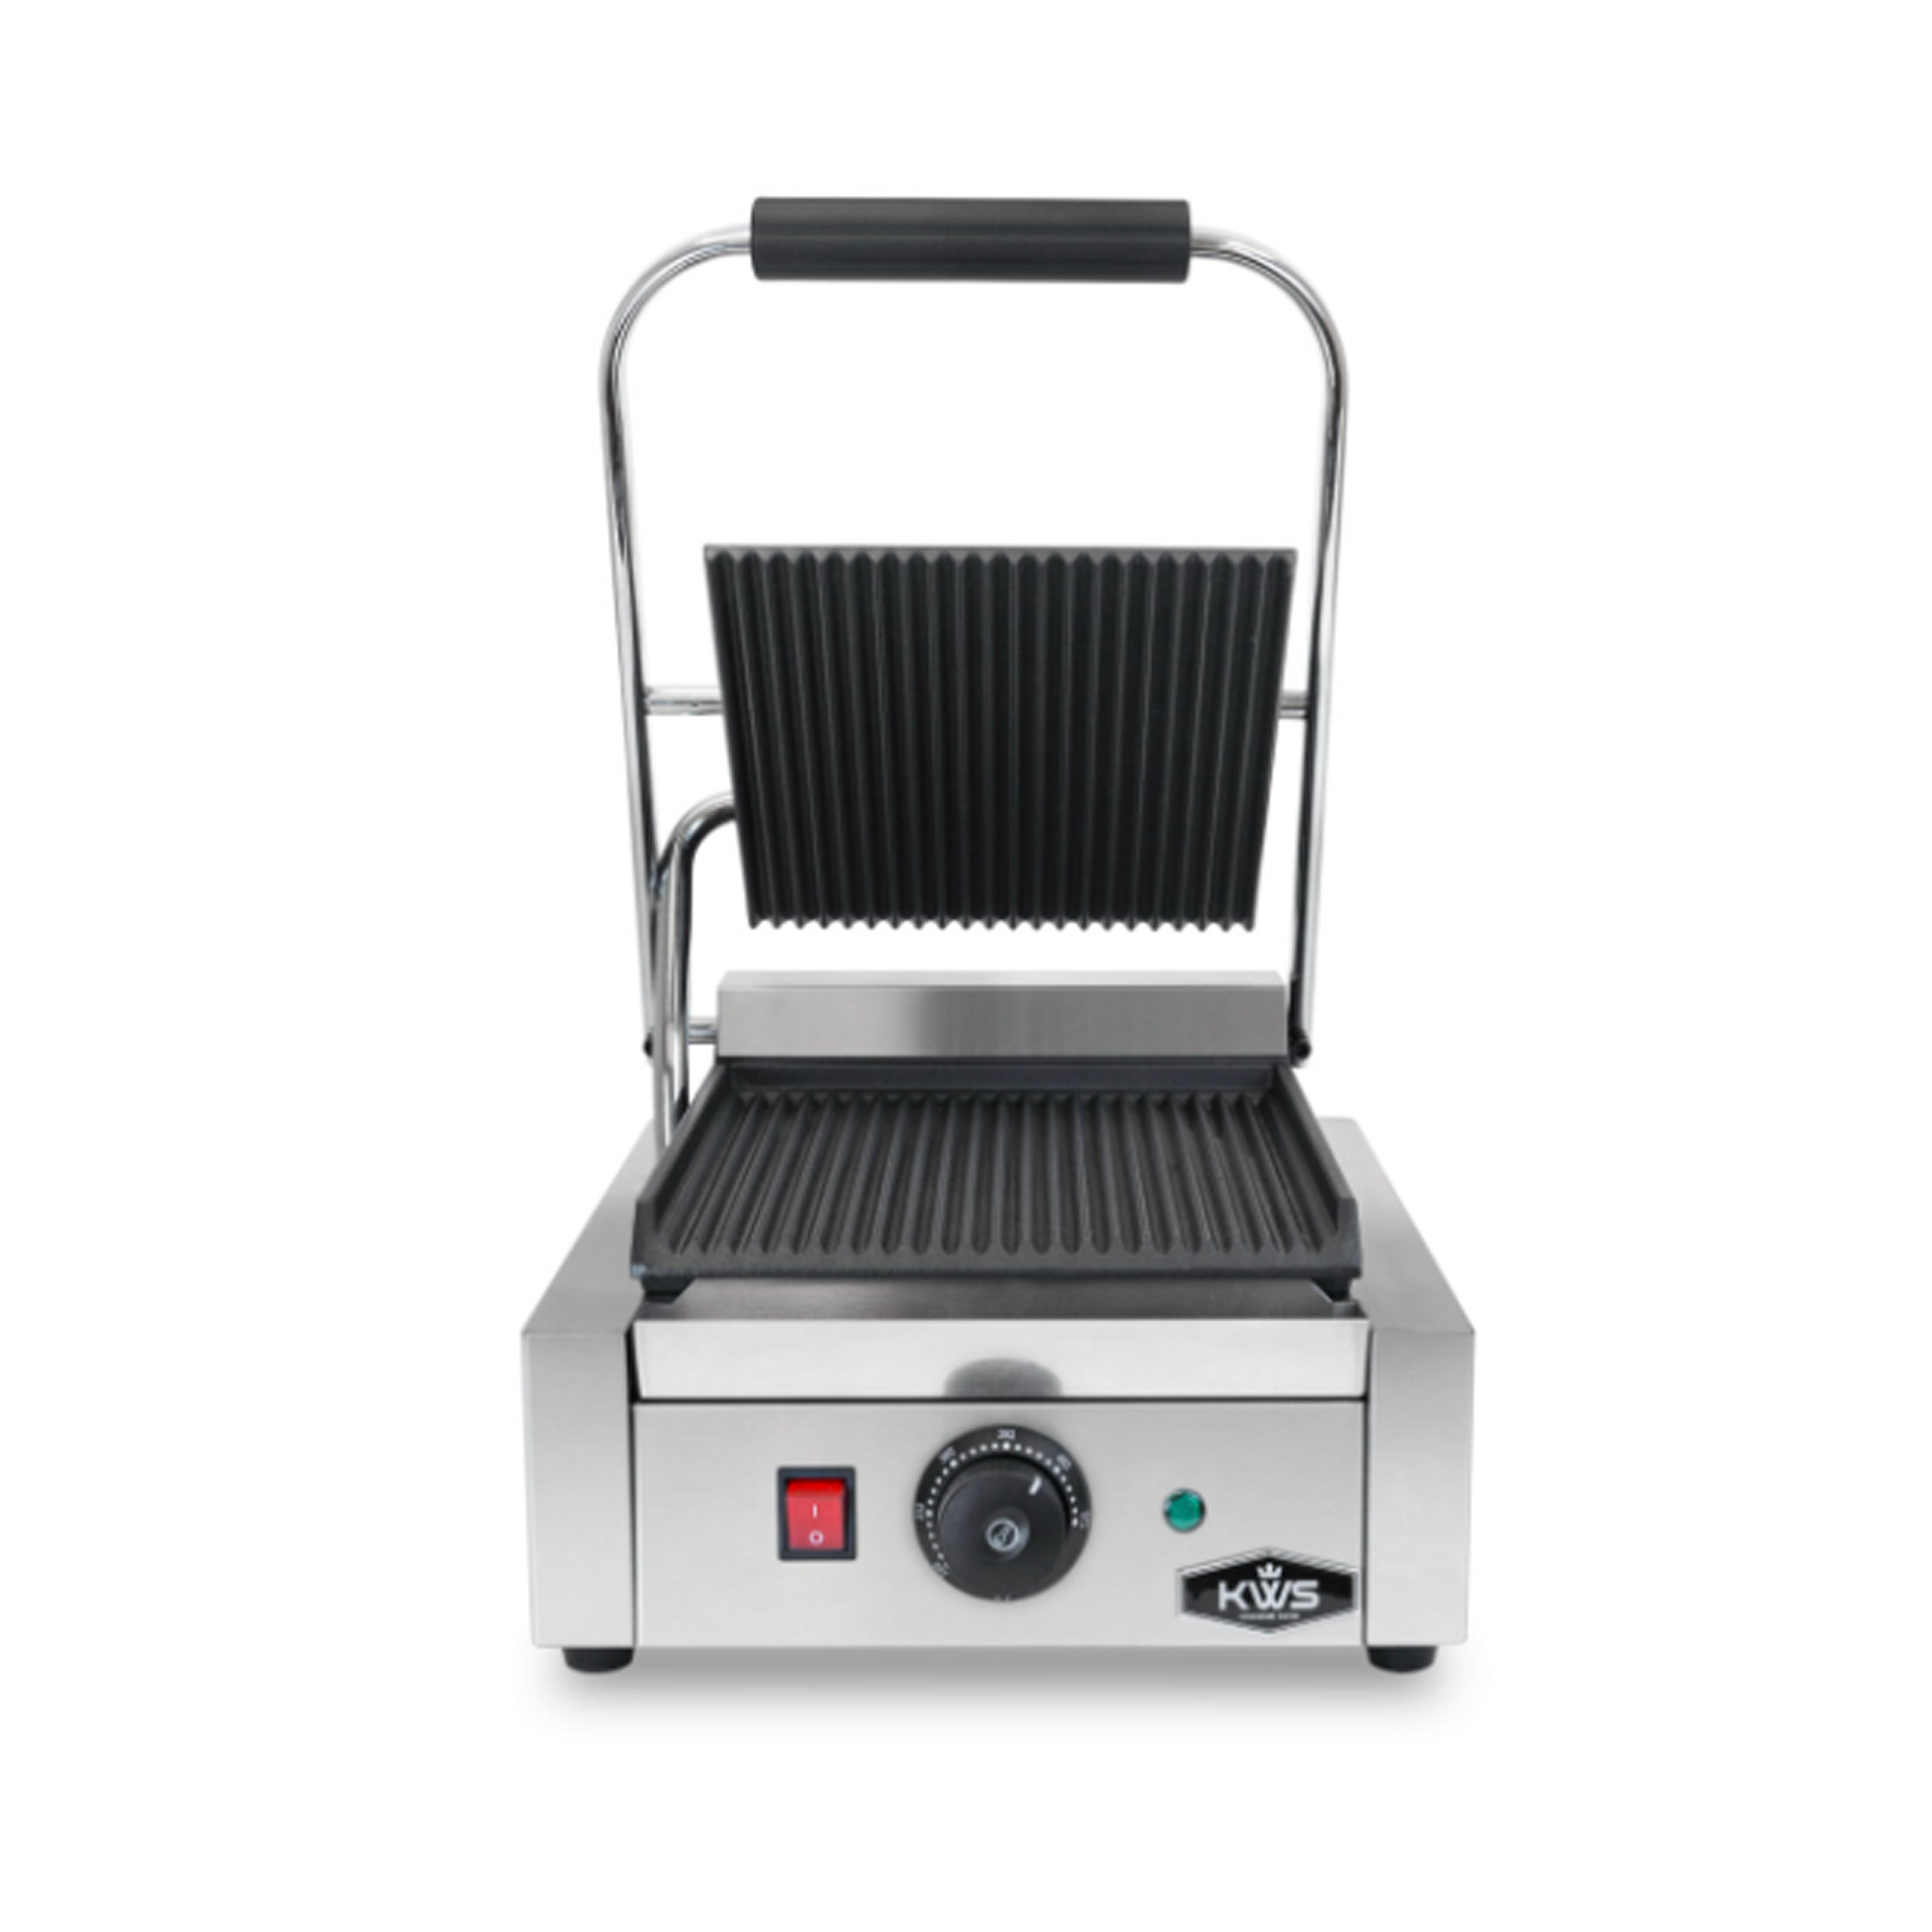 KWS - PM-16, Commercial Electric Panini Press Maker with Grooved Plates